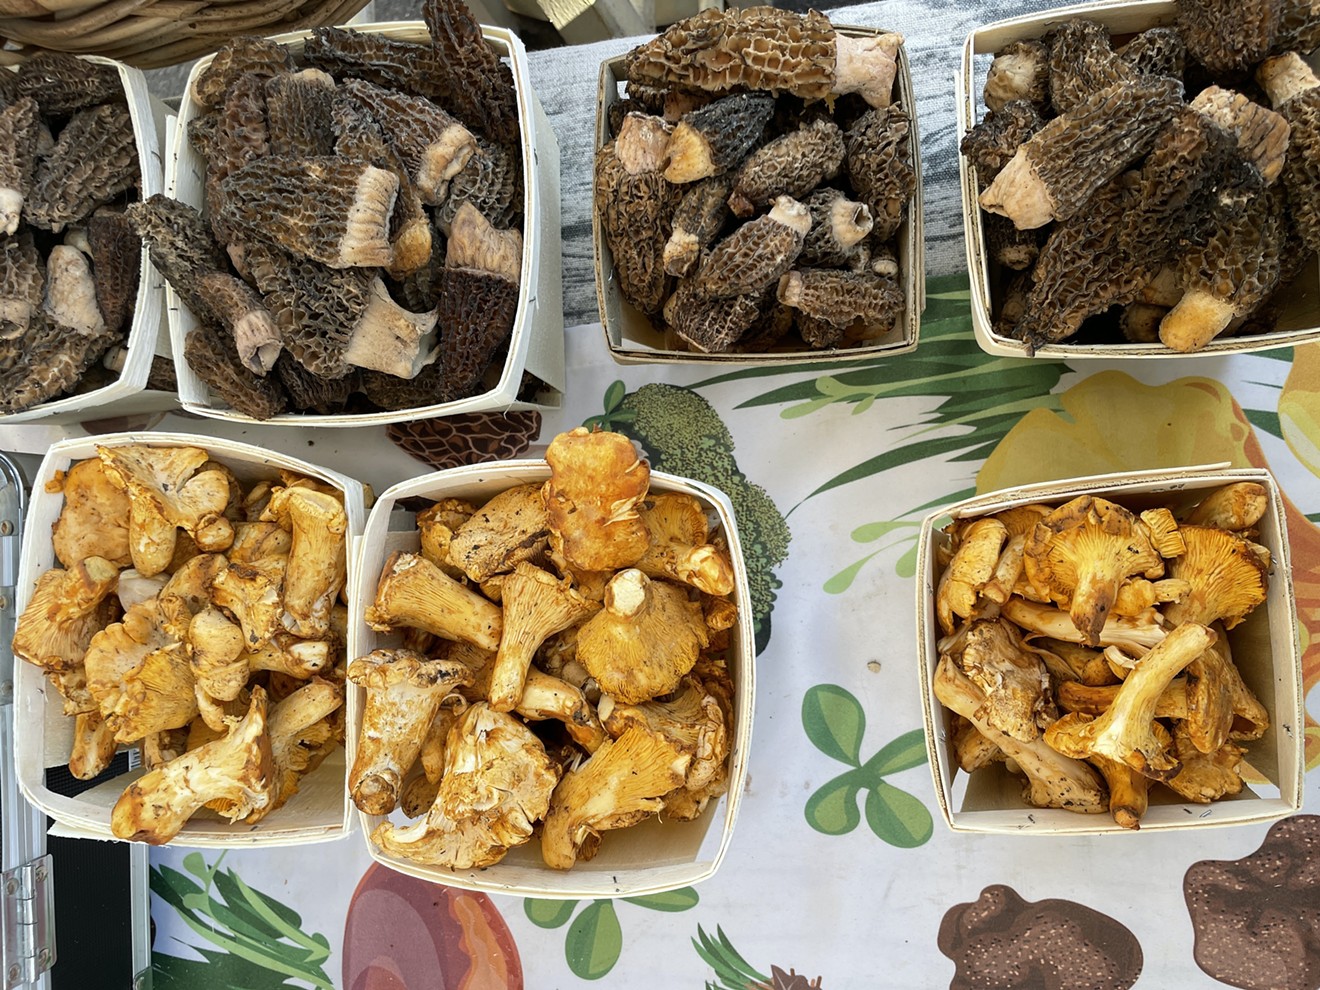 Mile High Fungi offers a variety of cultivated and foraged mushrooms at its farmers' market stands.